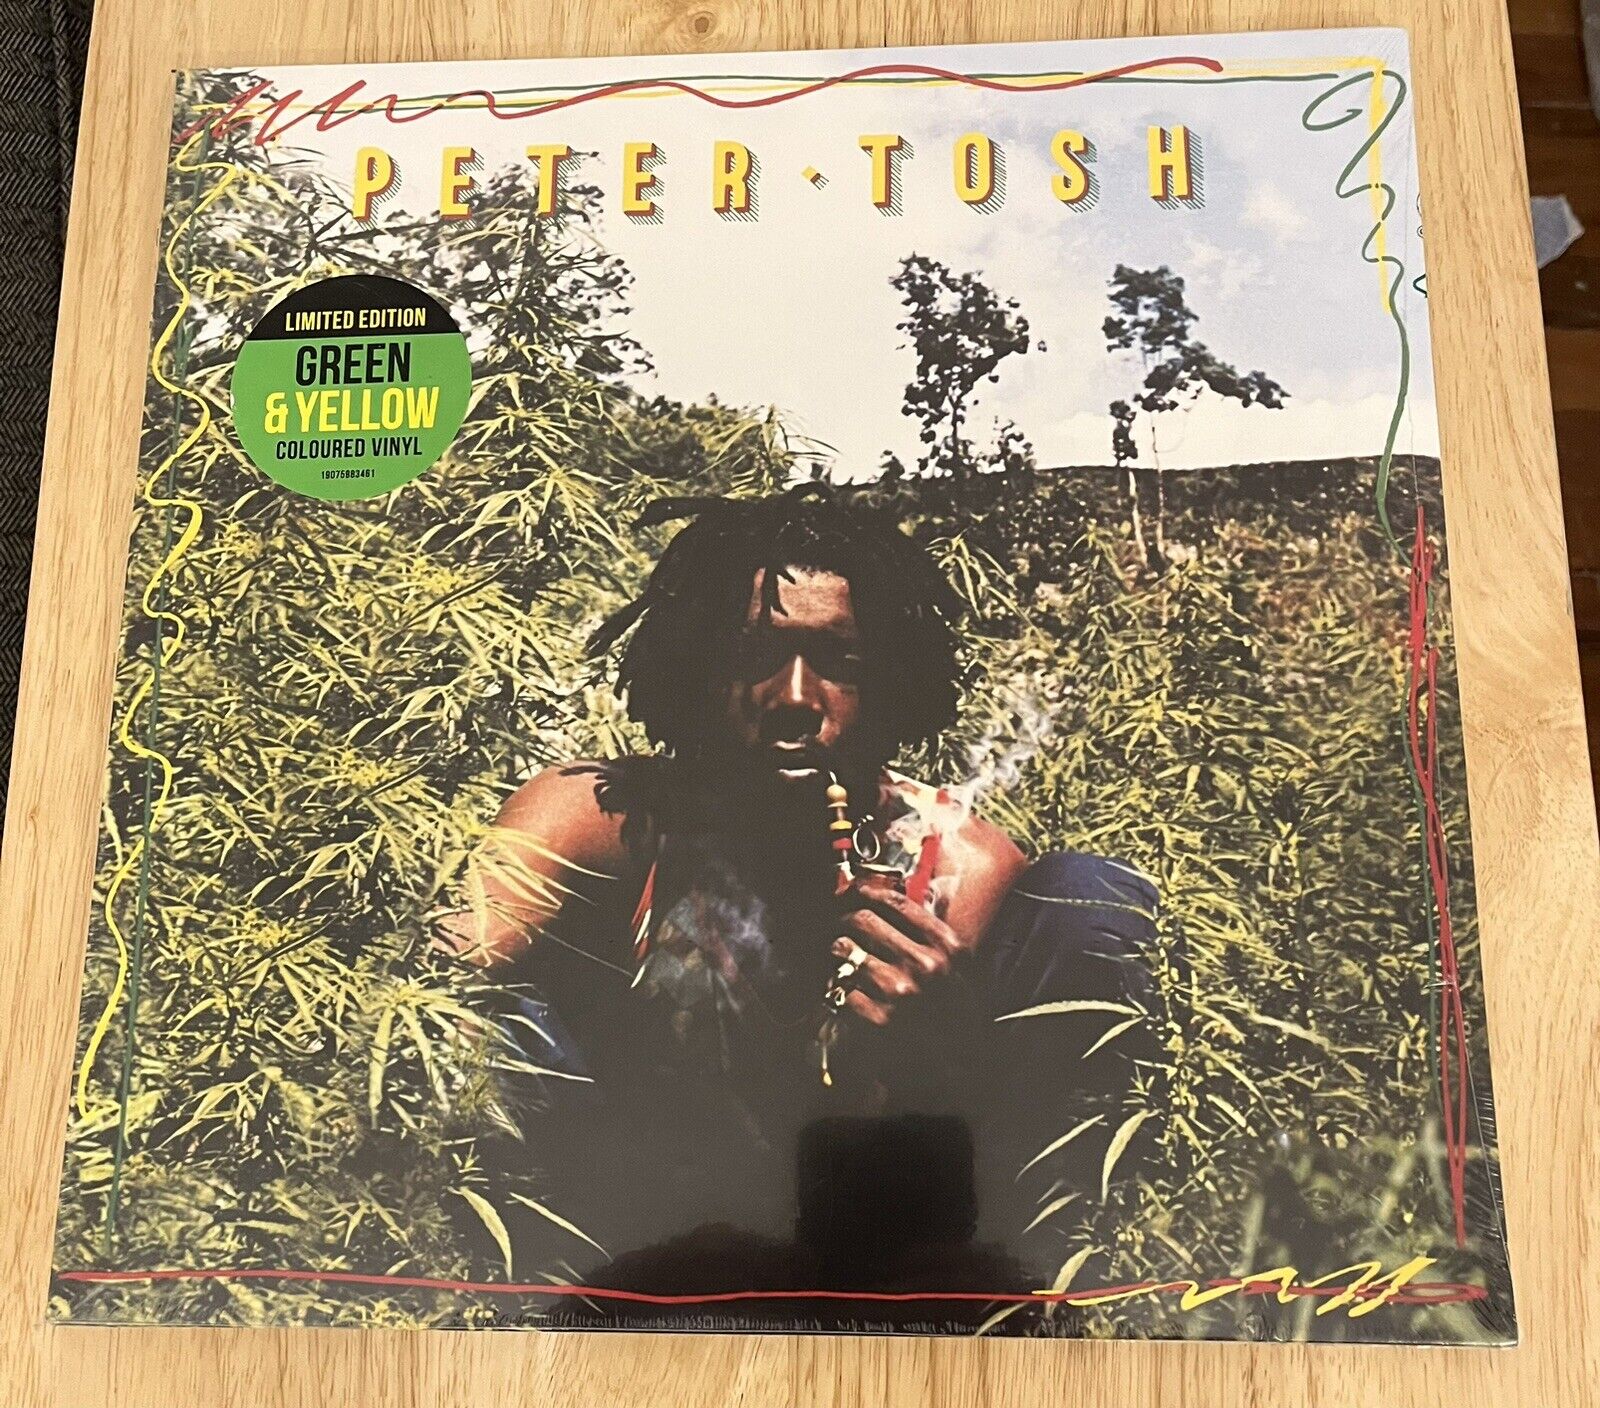 PETER TOSH - Legalize It - Green & Yellow Vinyl - Limited Edition - New & Sealed